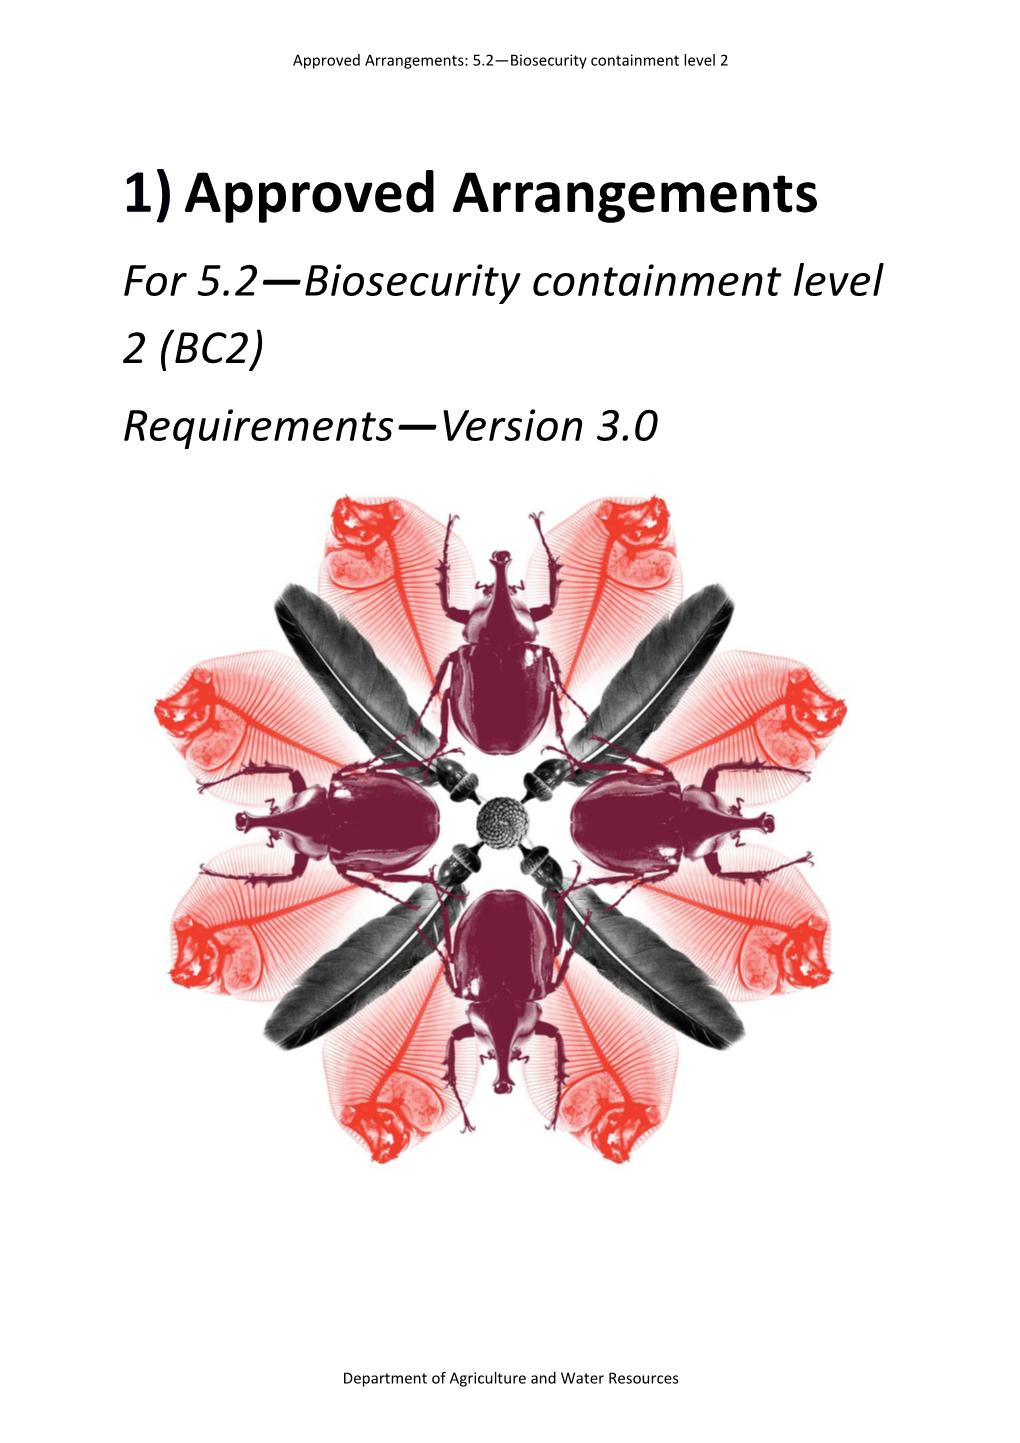 Approved Arrangements for 5.2: Biosecurity Containment Level 2 (BC2) - Requirements